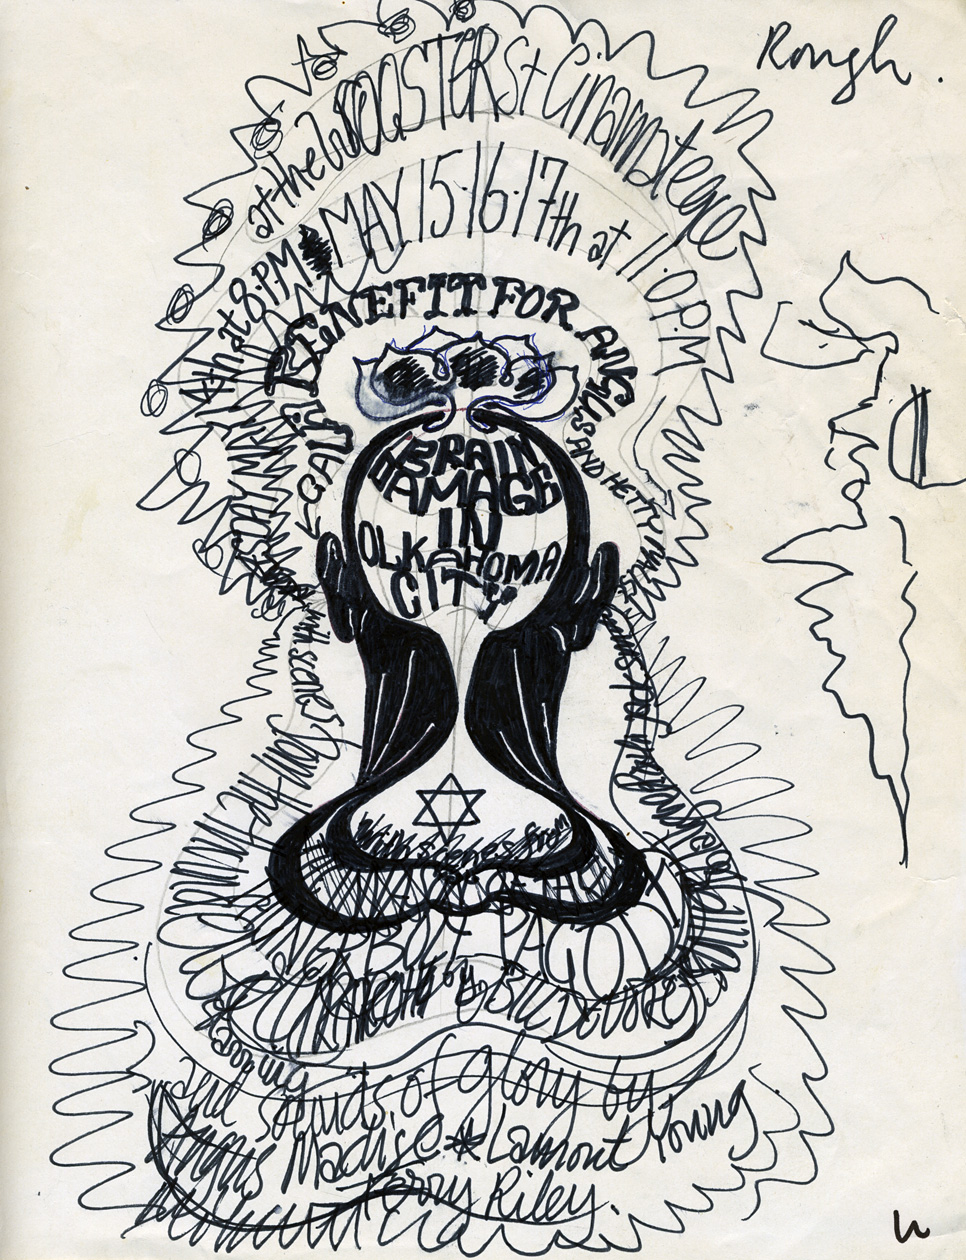 Hetty MacLise (?), rough sketch poster for the Brain Damage in Oklahoma City Gala Benefit for Angus and Hetty MacLise